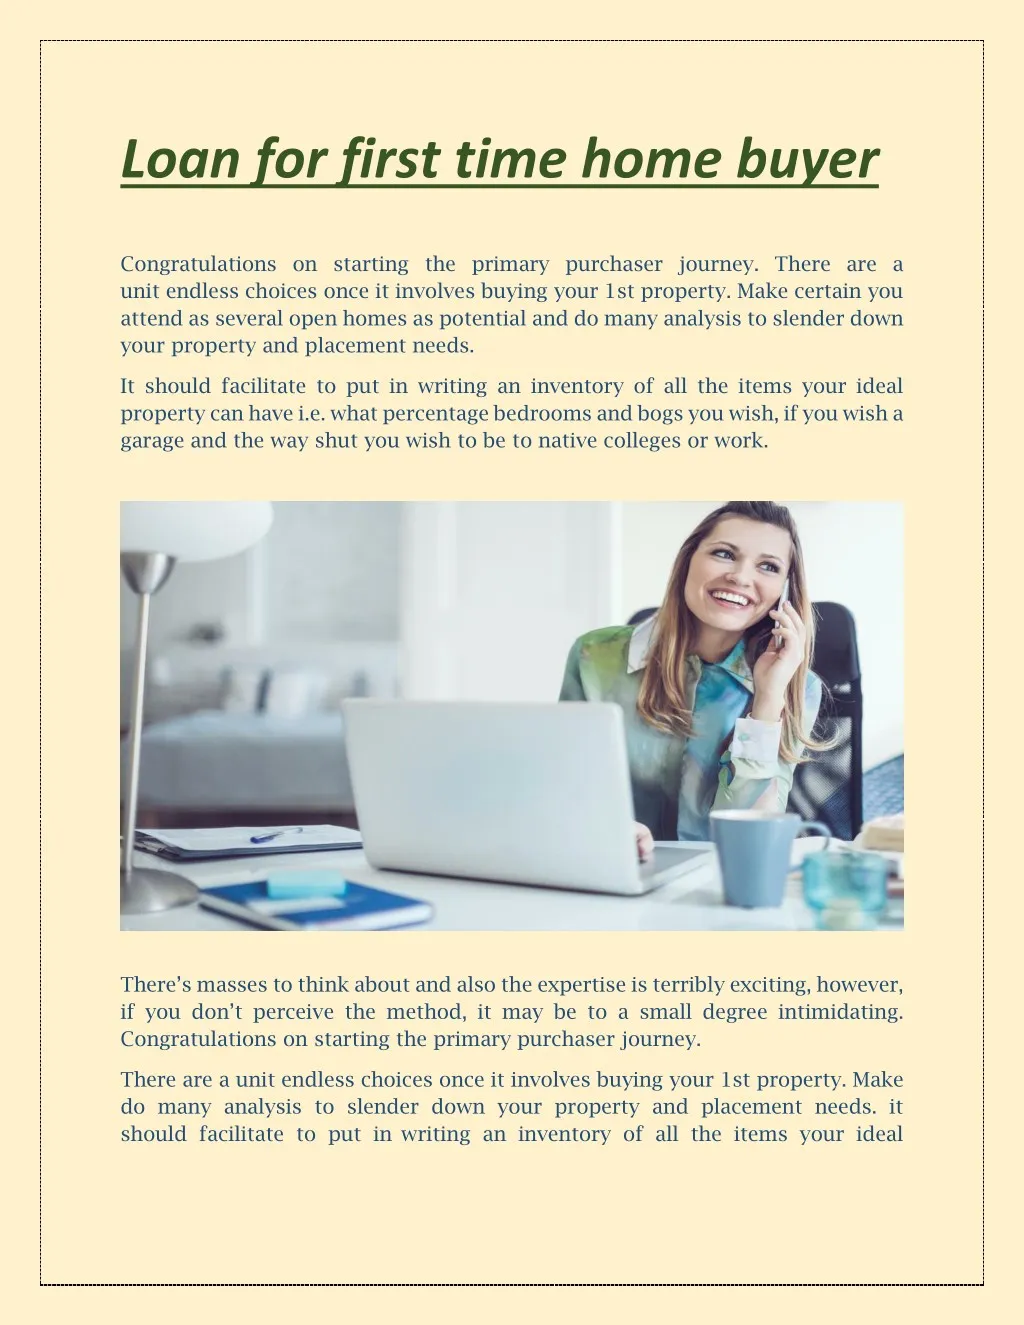 loan for first time home buyer